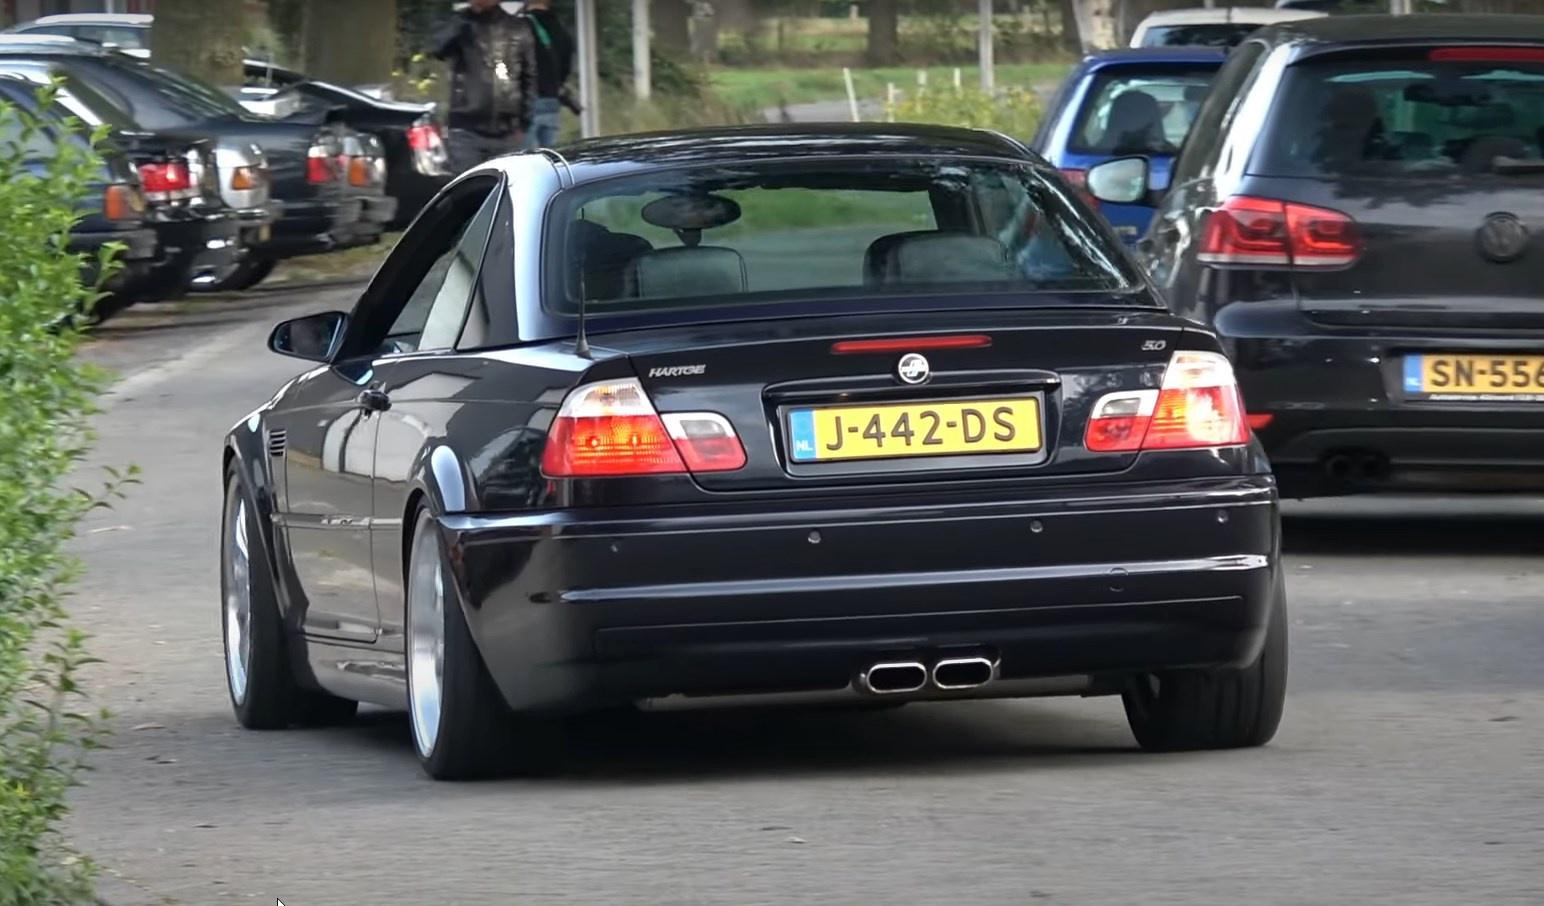 Hartge E46 BMW H50 V8 Swapped Rear end as it drives into a car show